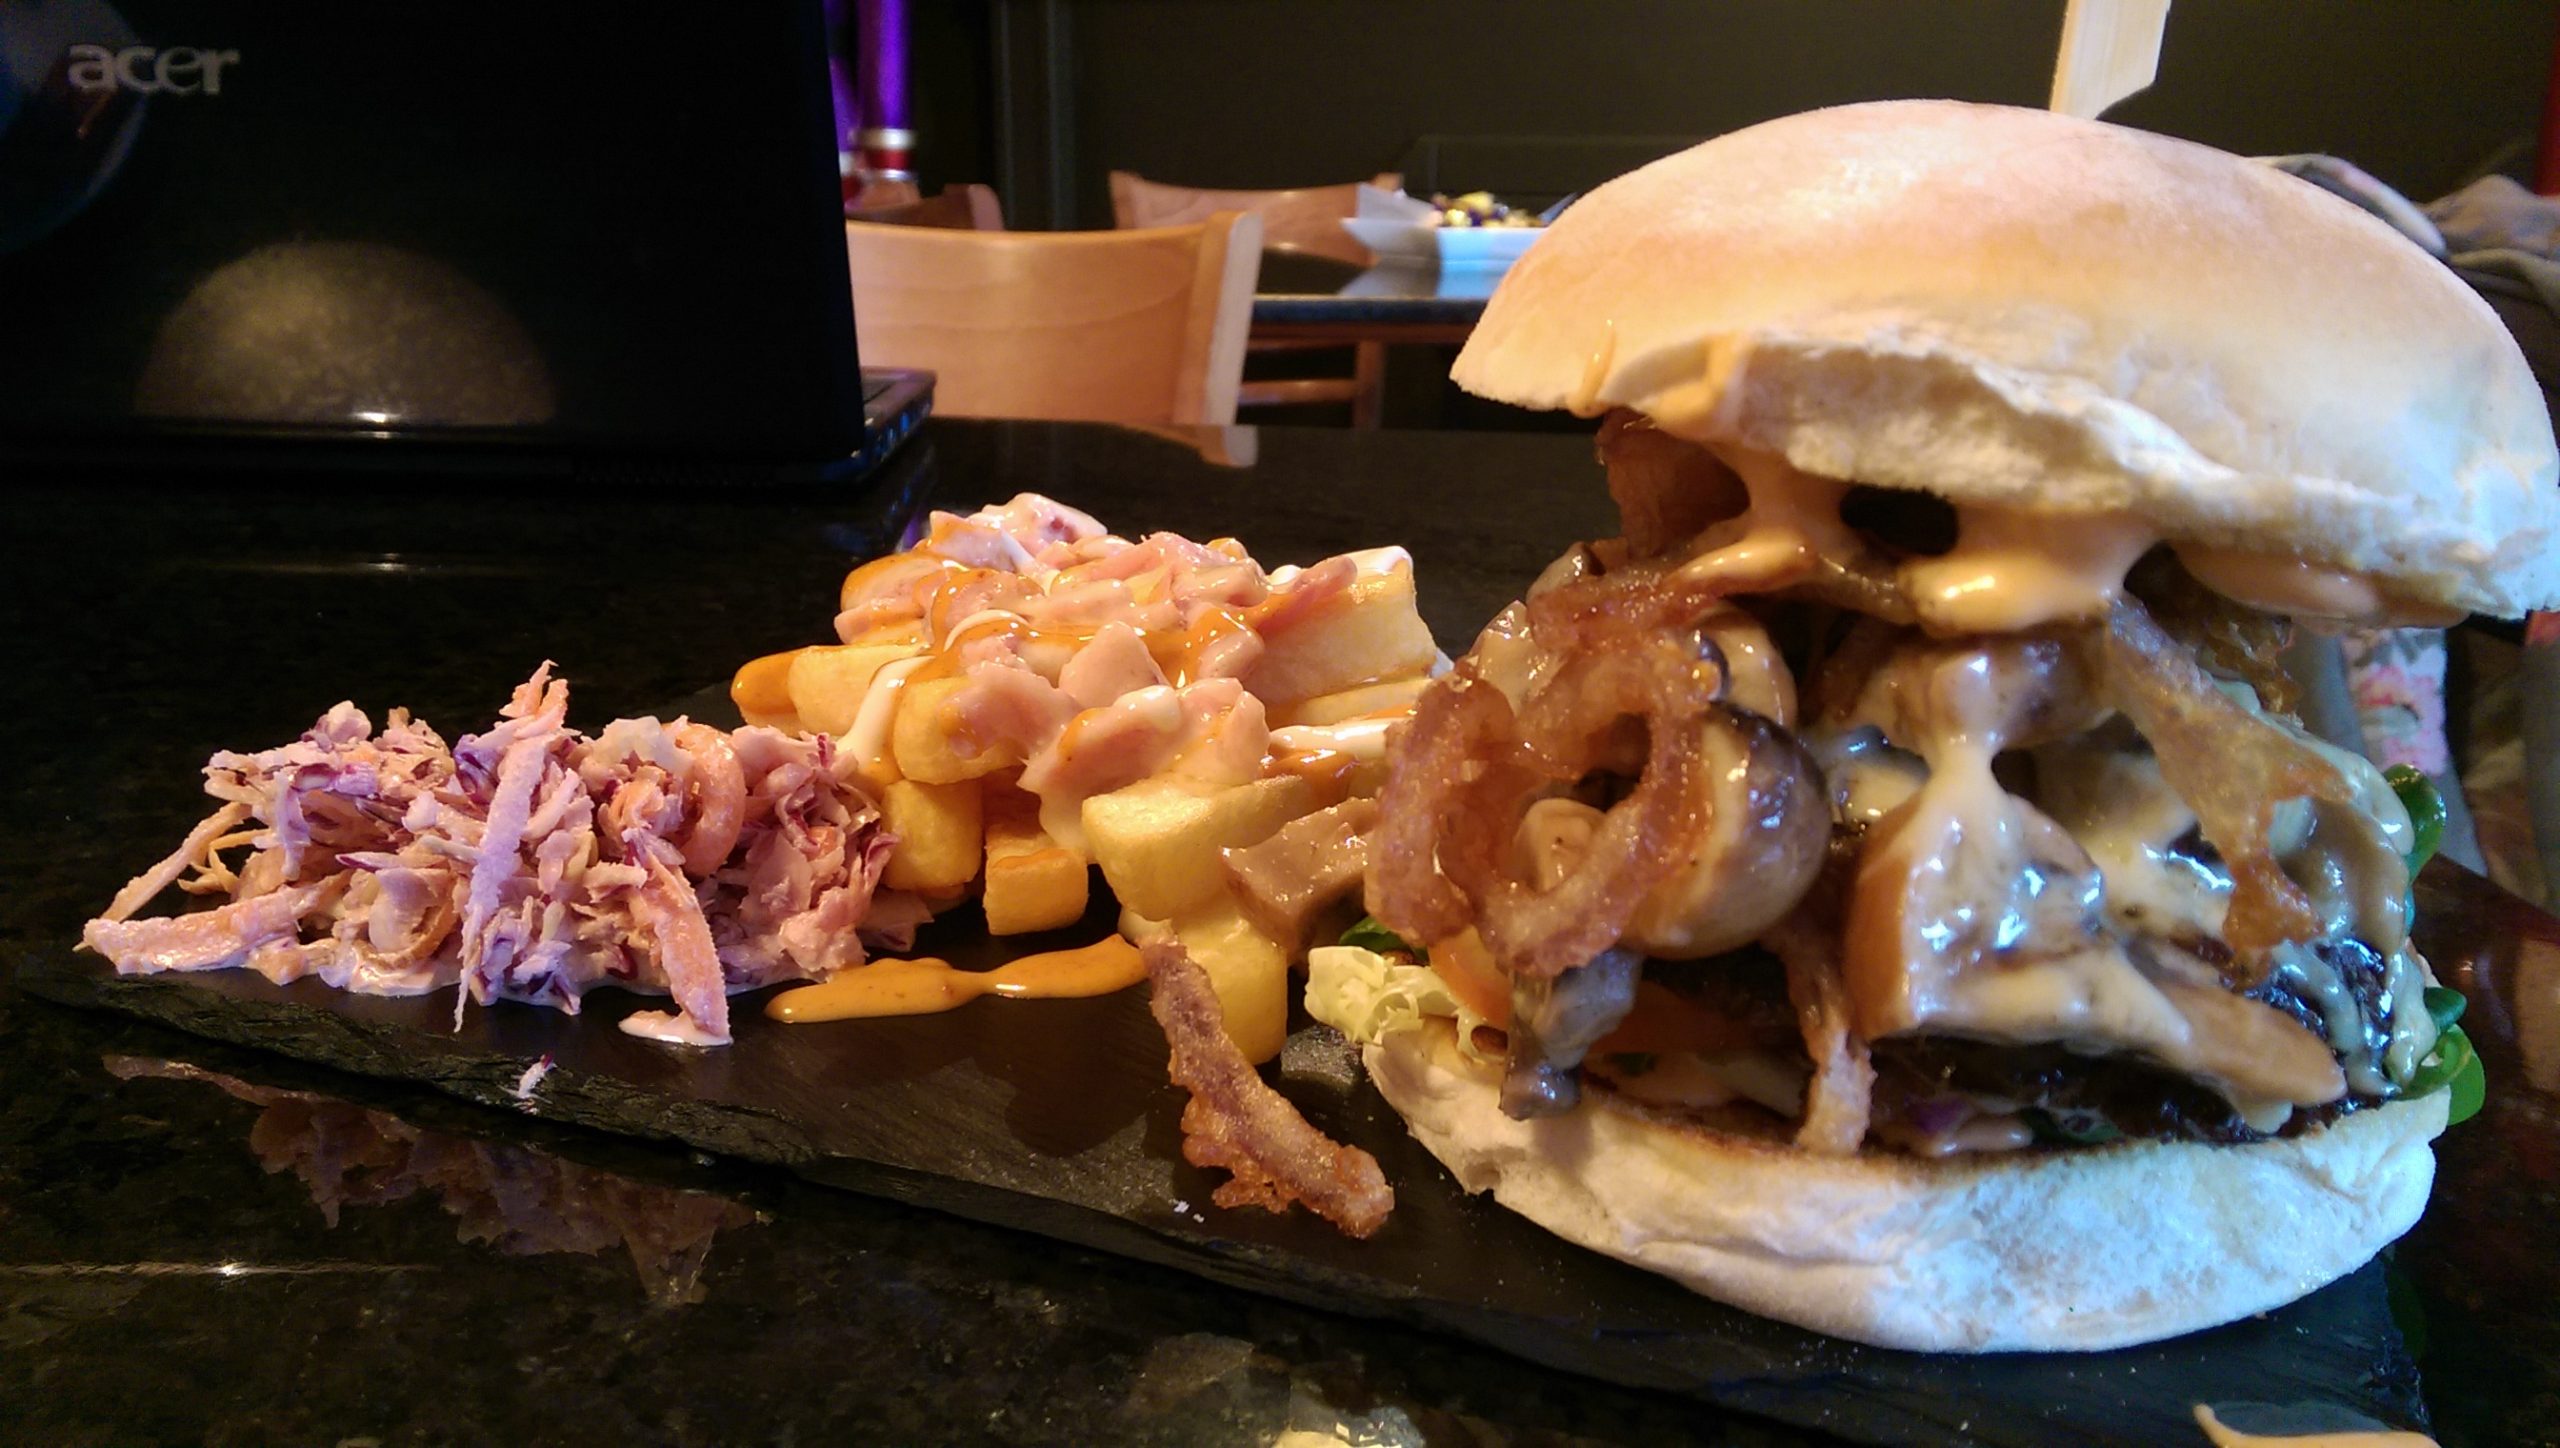 The Luvly Burger - £4.50